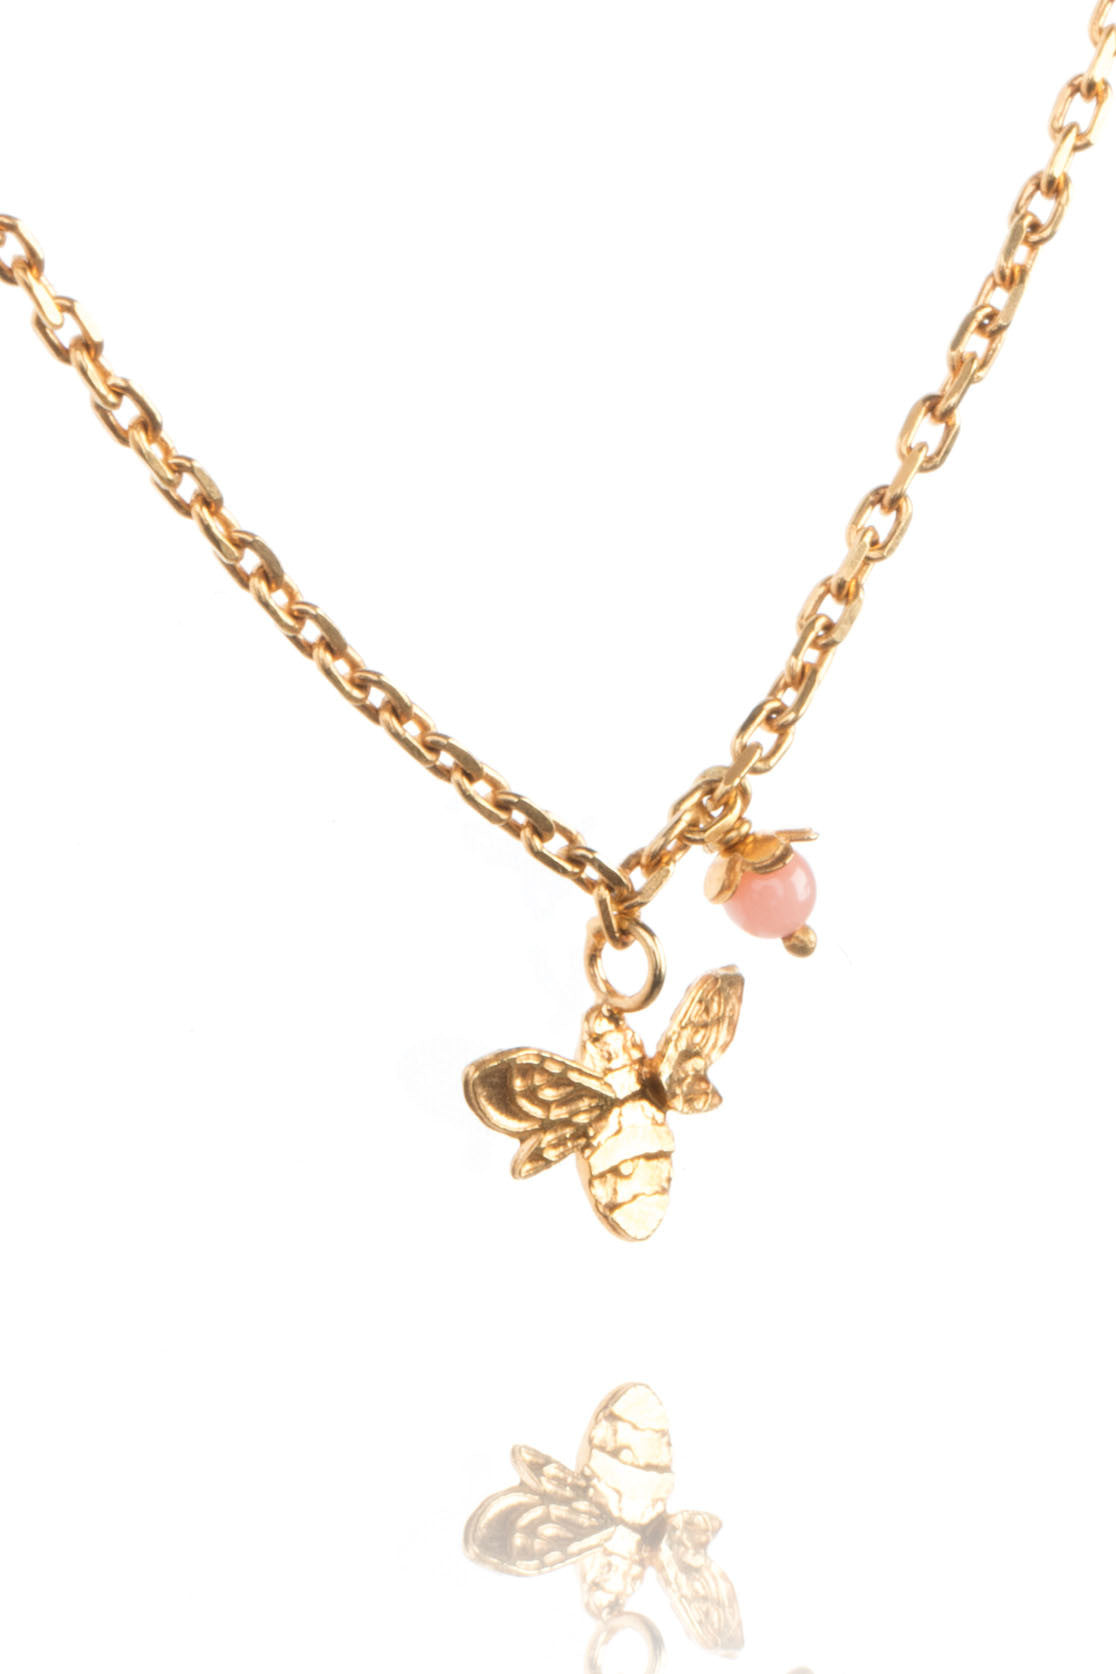 Sterling Silver or Gold Mini Bee Necklace With Pink Flower